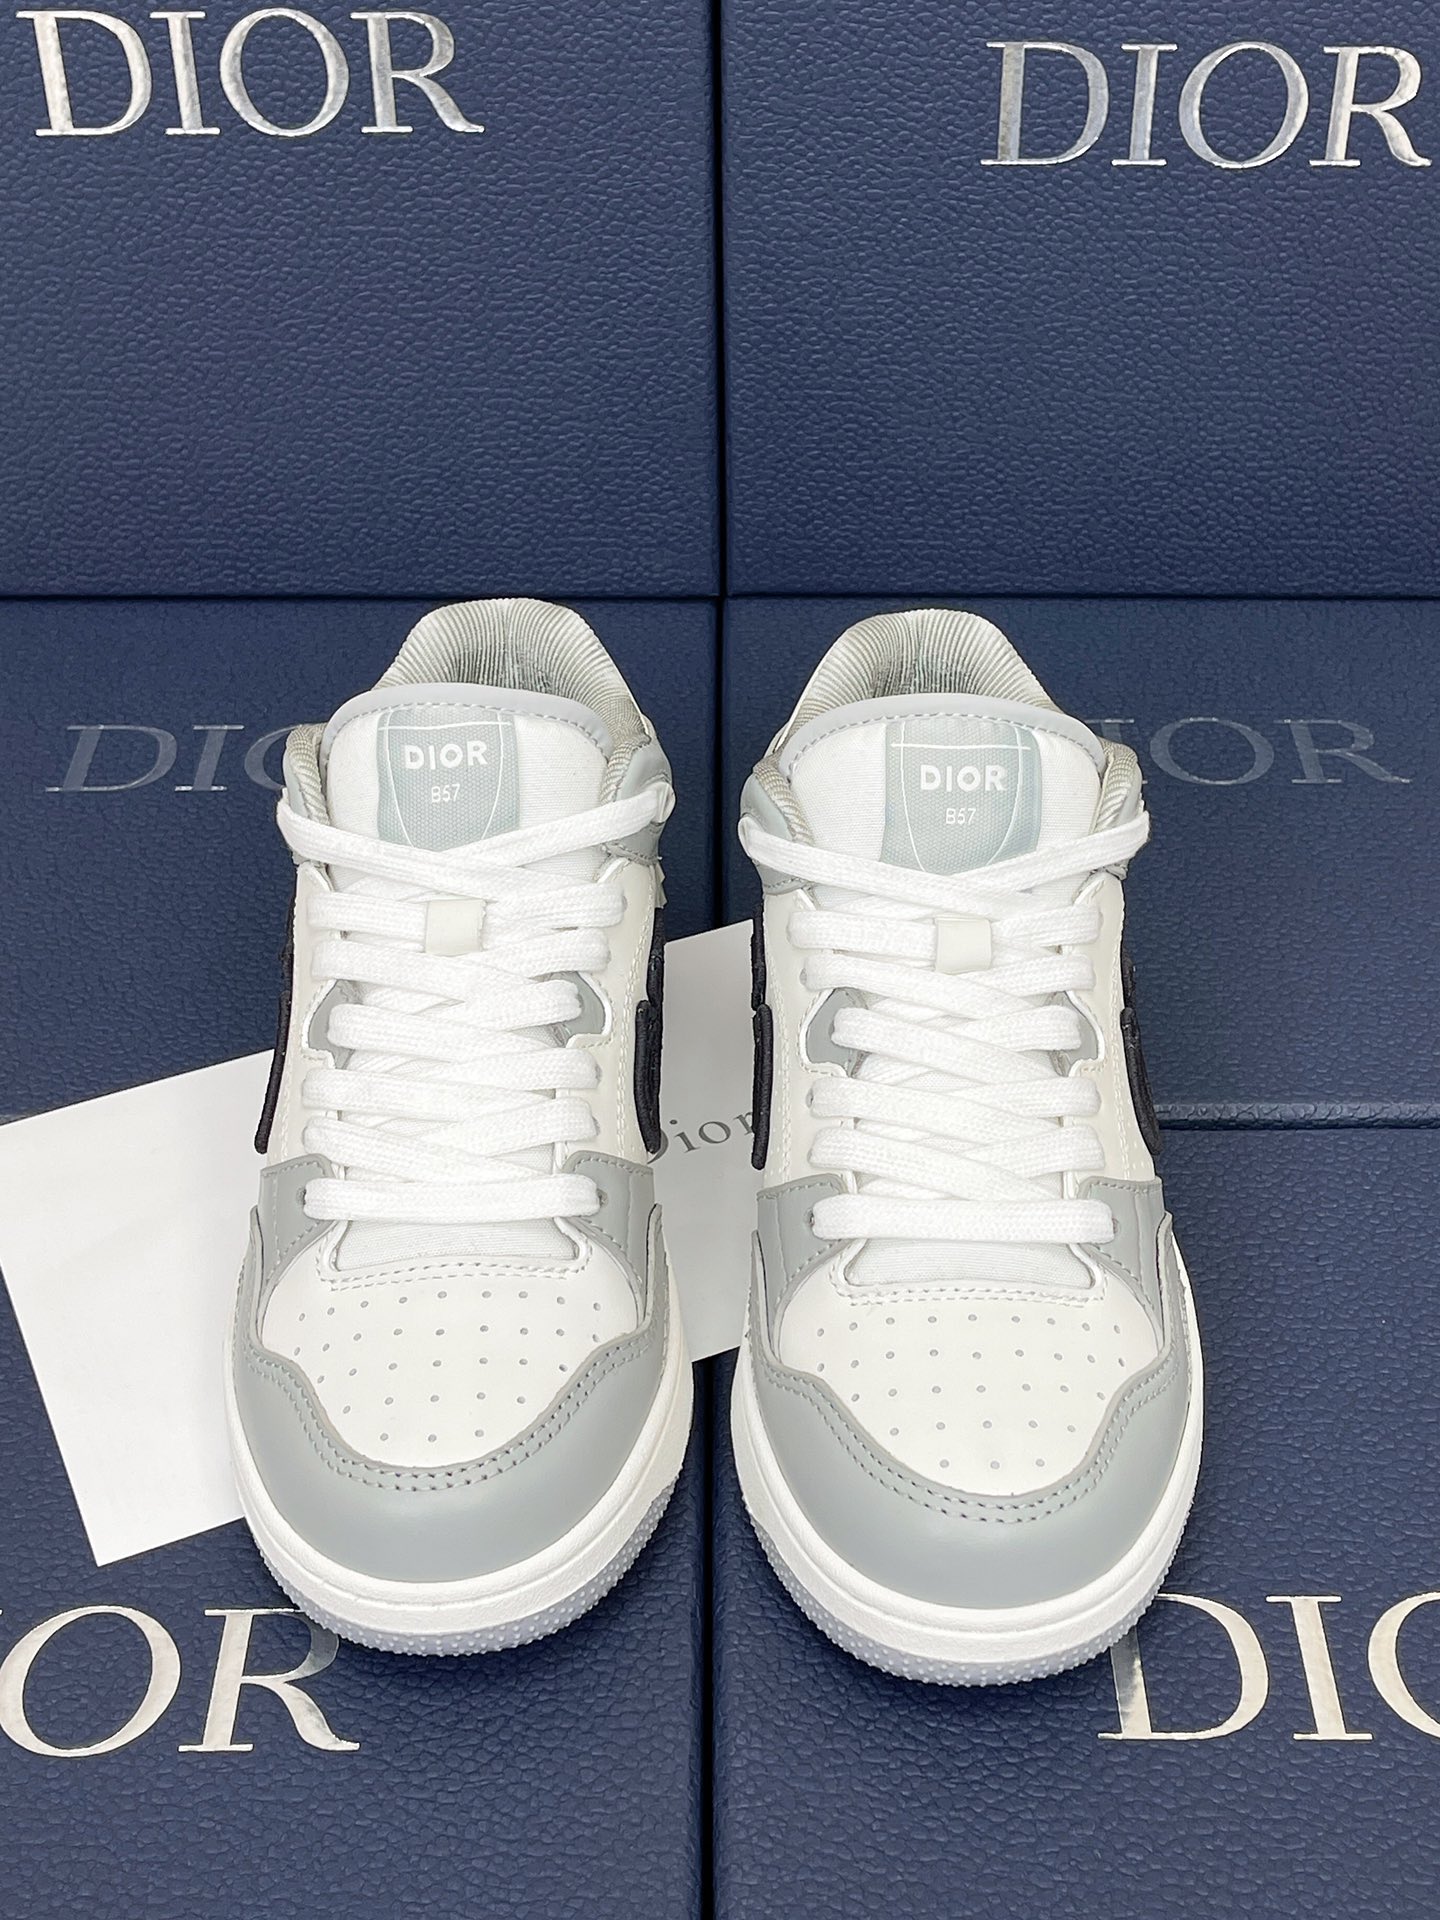 Dior Shoes Sneakers TPU Vintage Casual